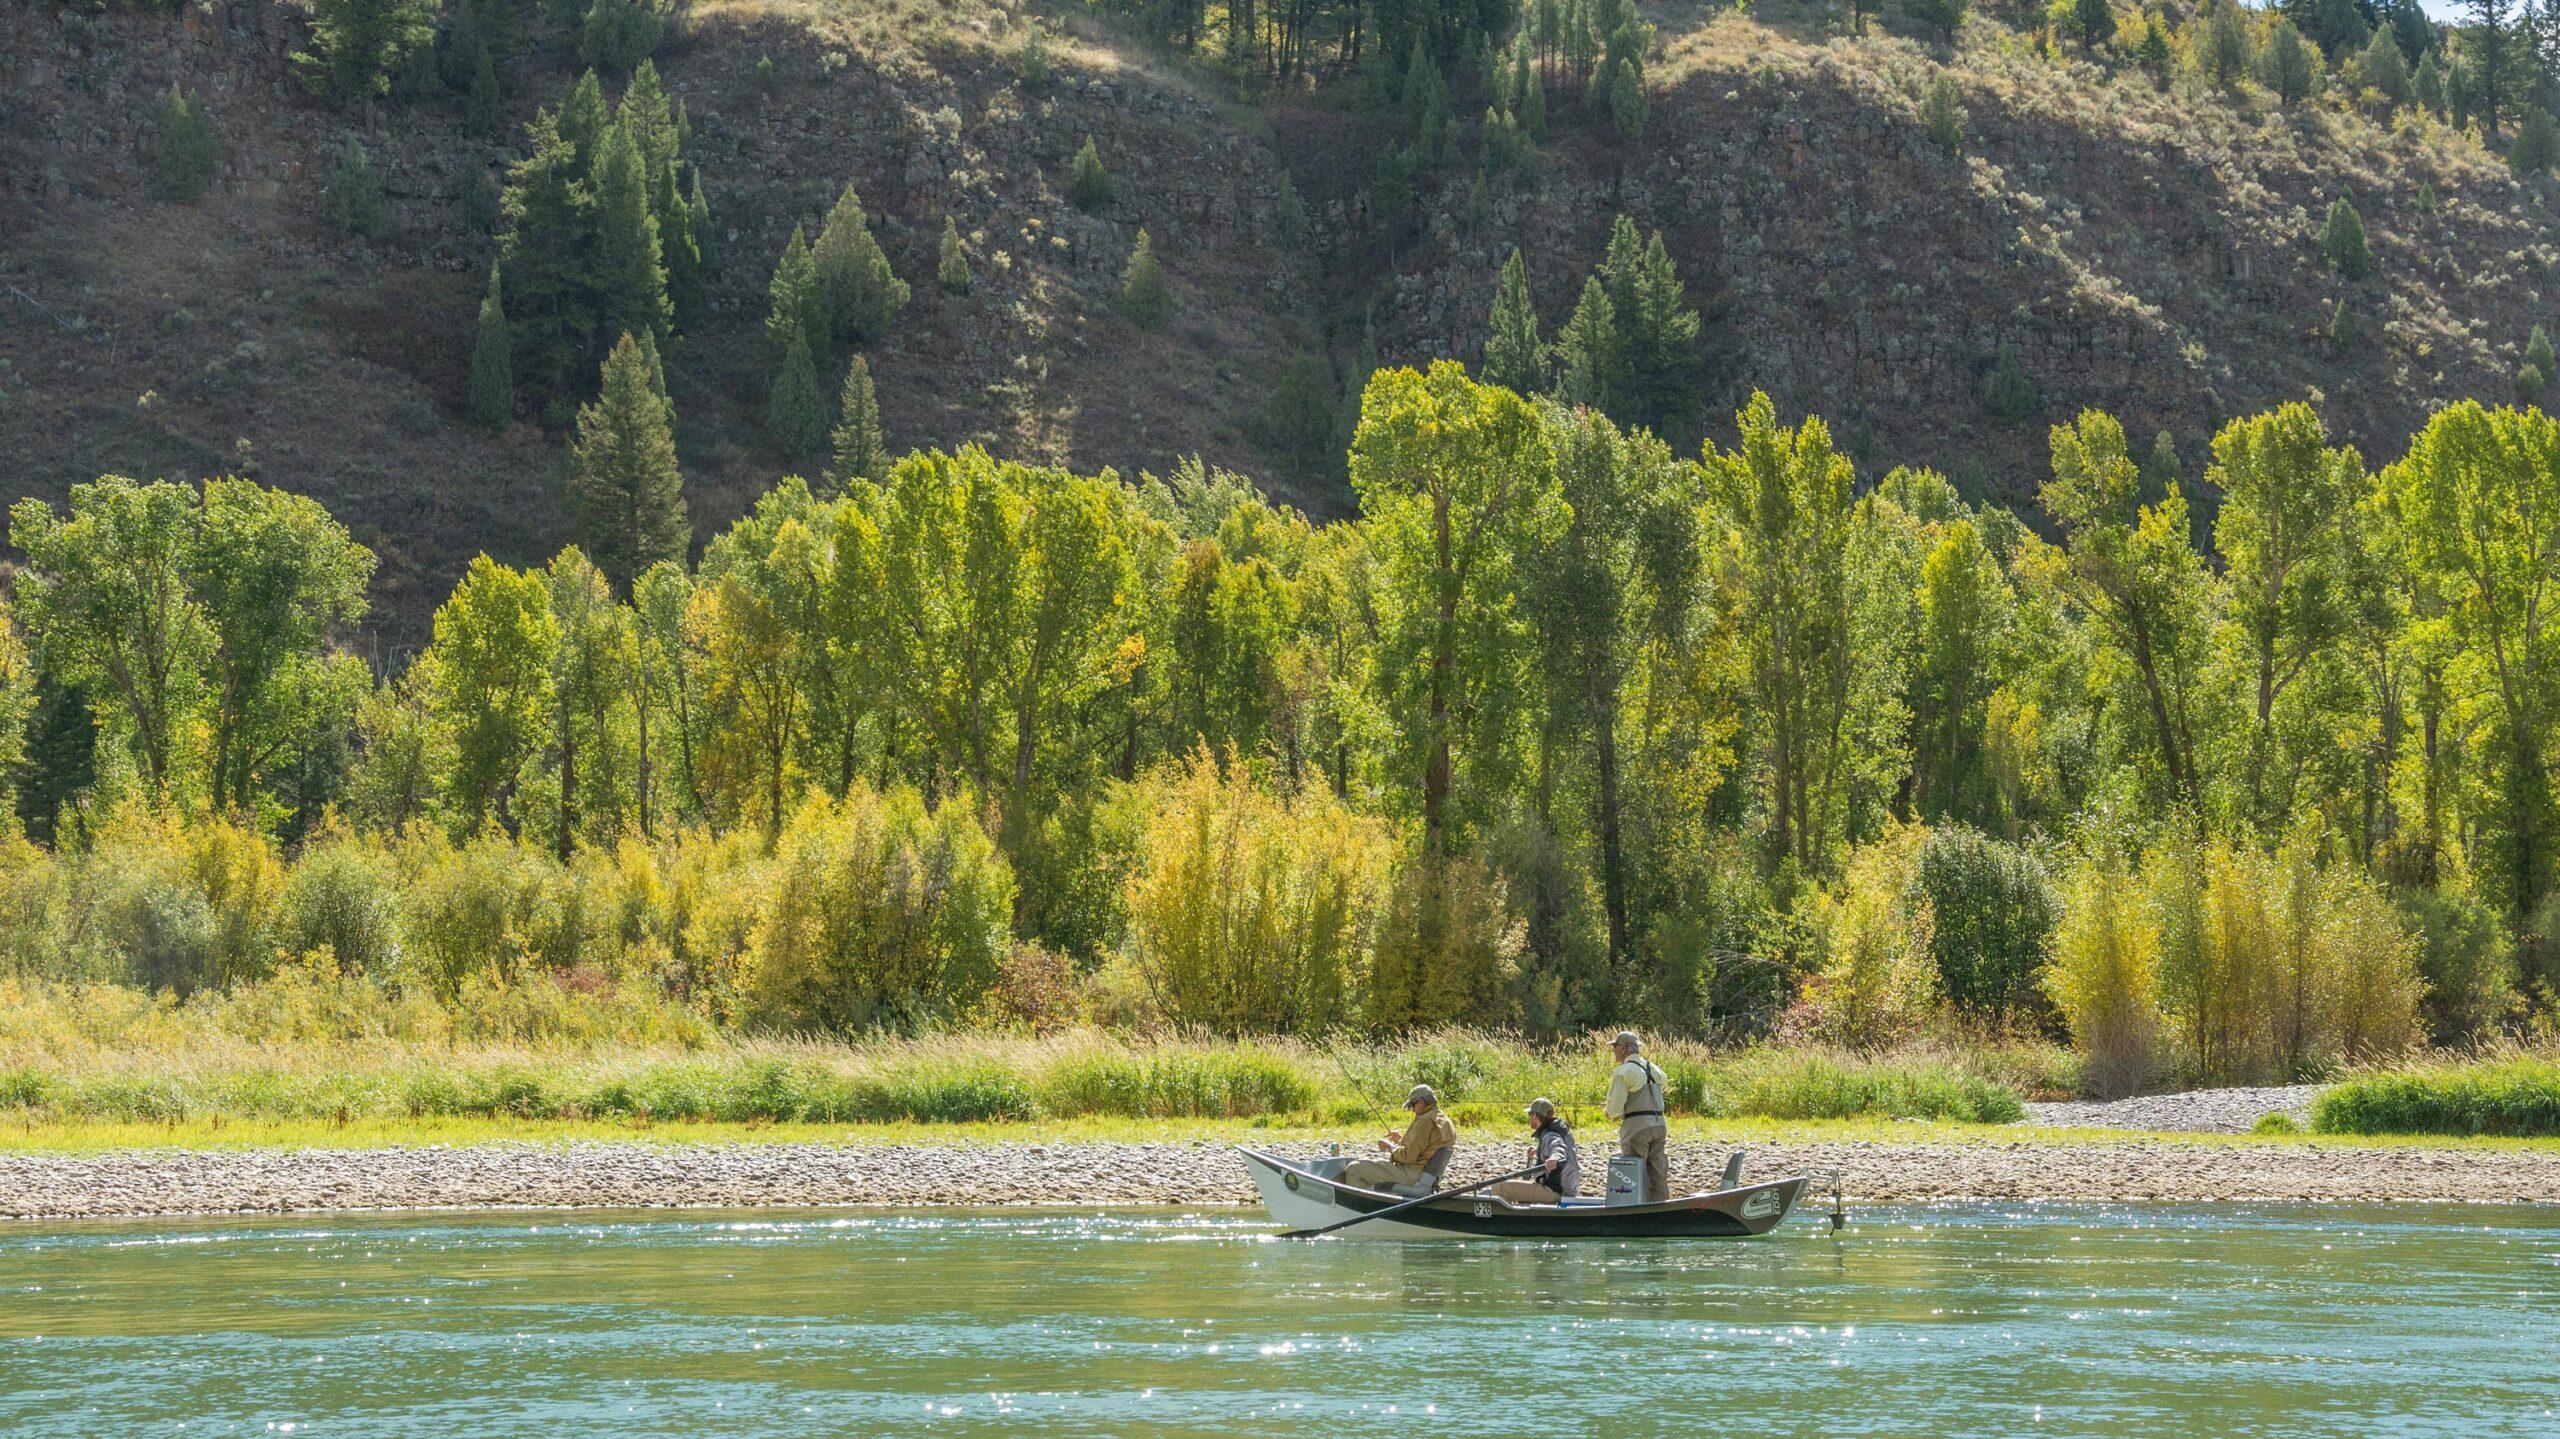 Fly Fishing Guide in Boat with Two Anglers on the South Fork of the Snake River, Idaho